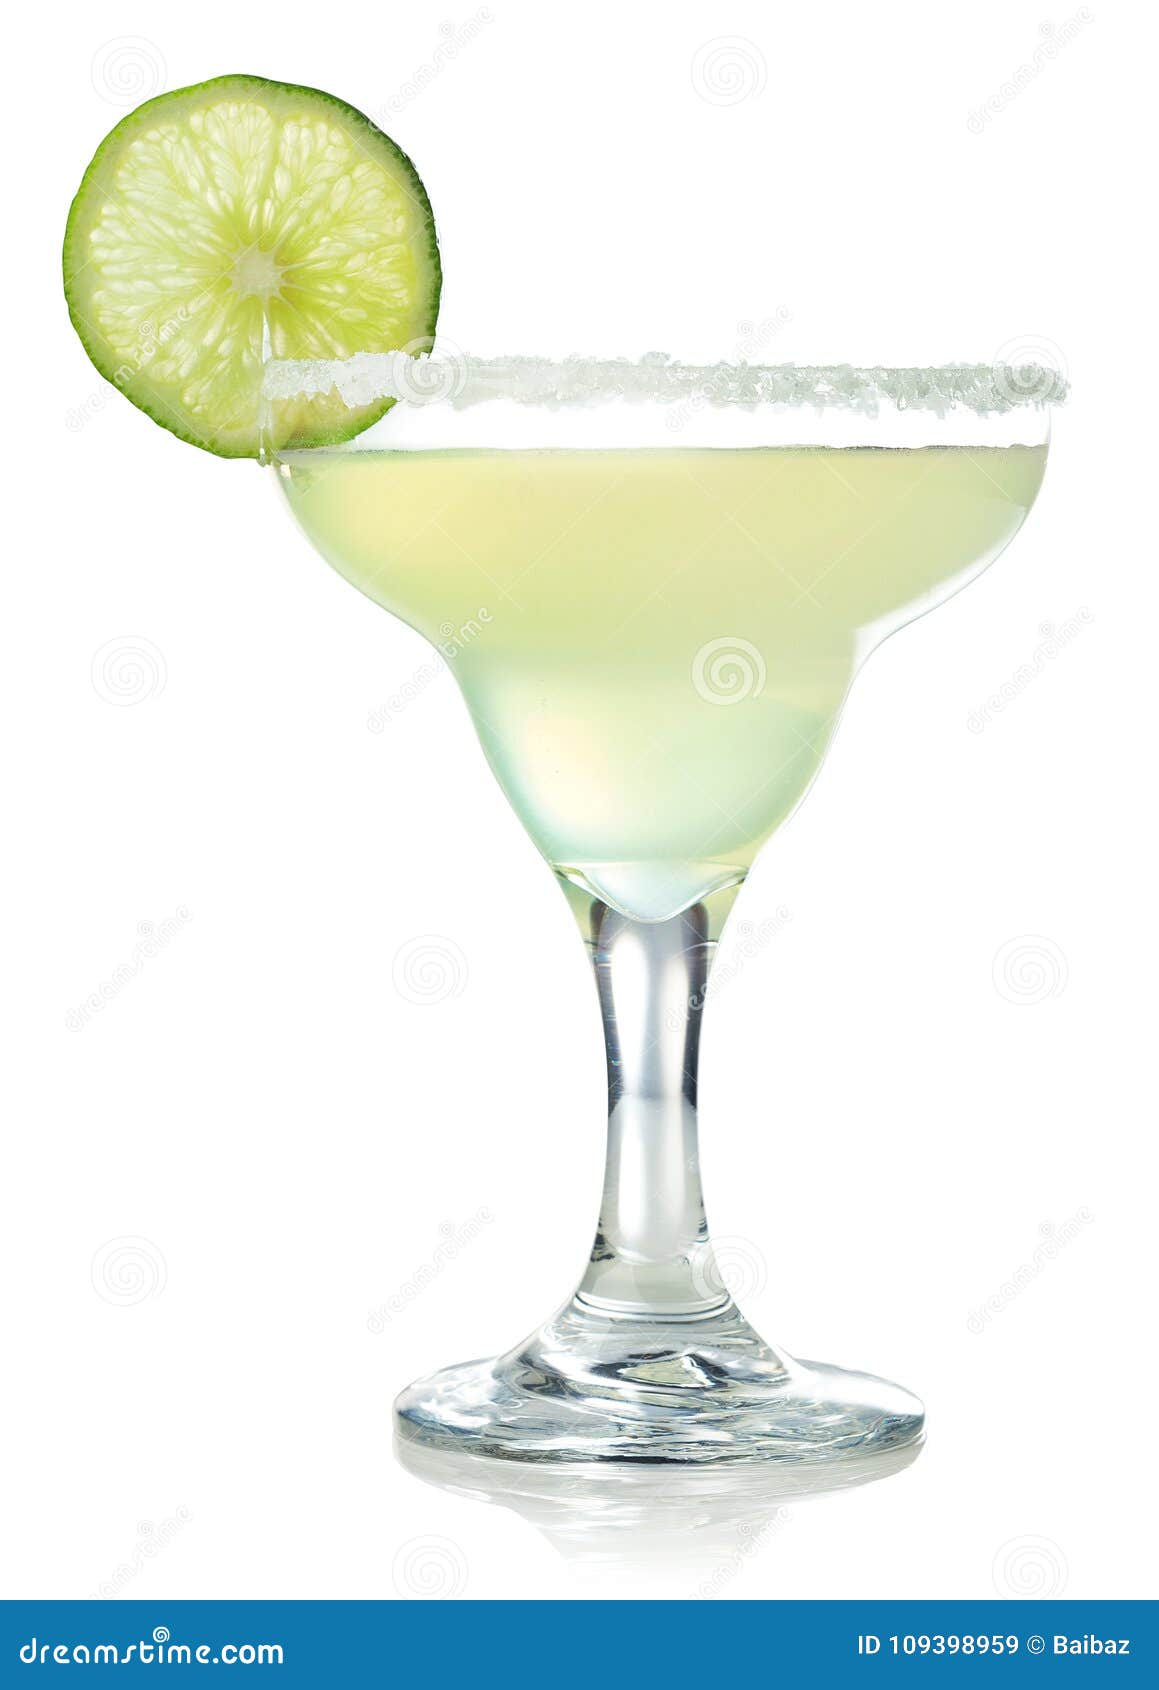 classic margarita cocktail with lime